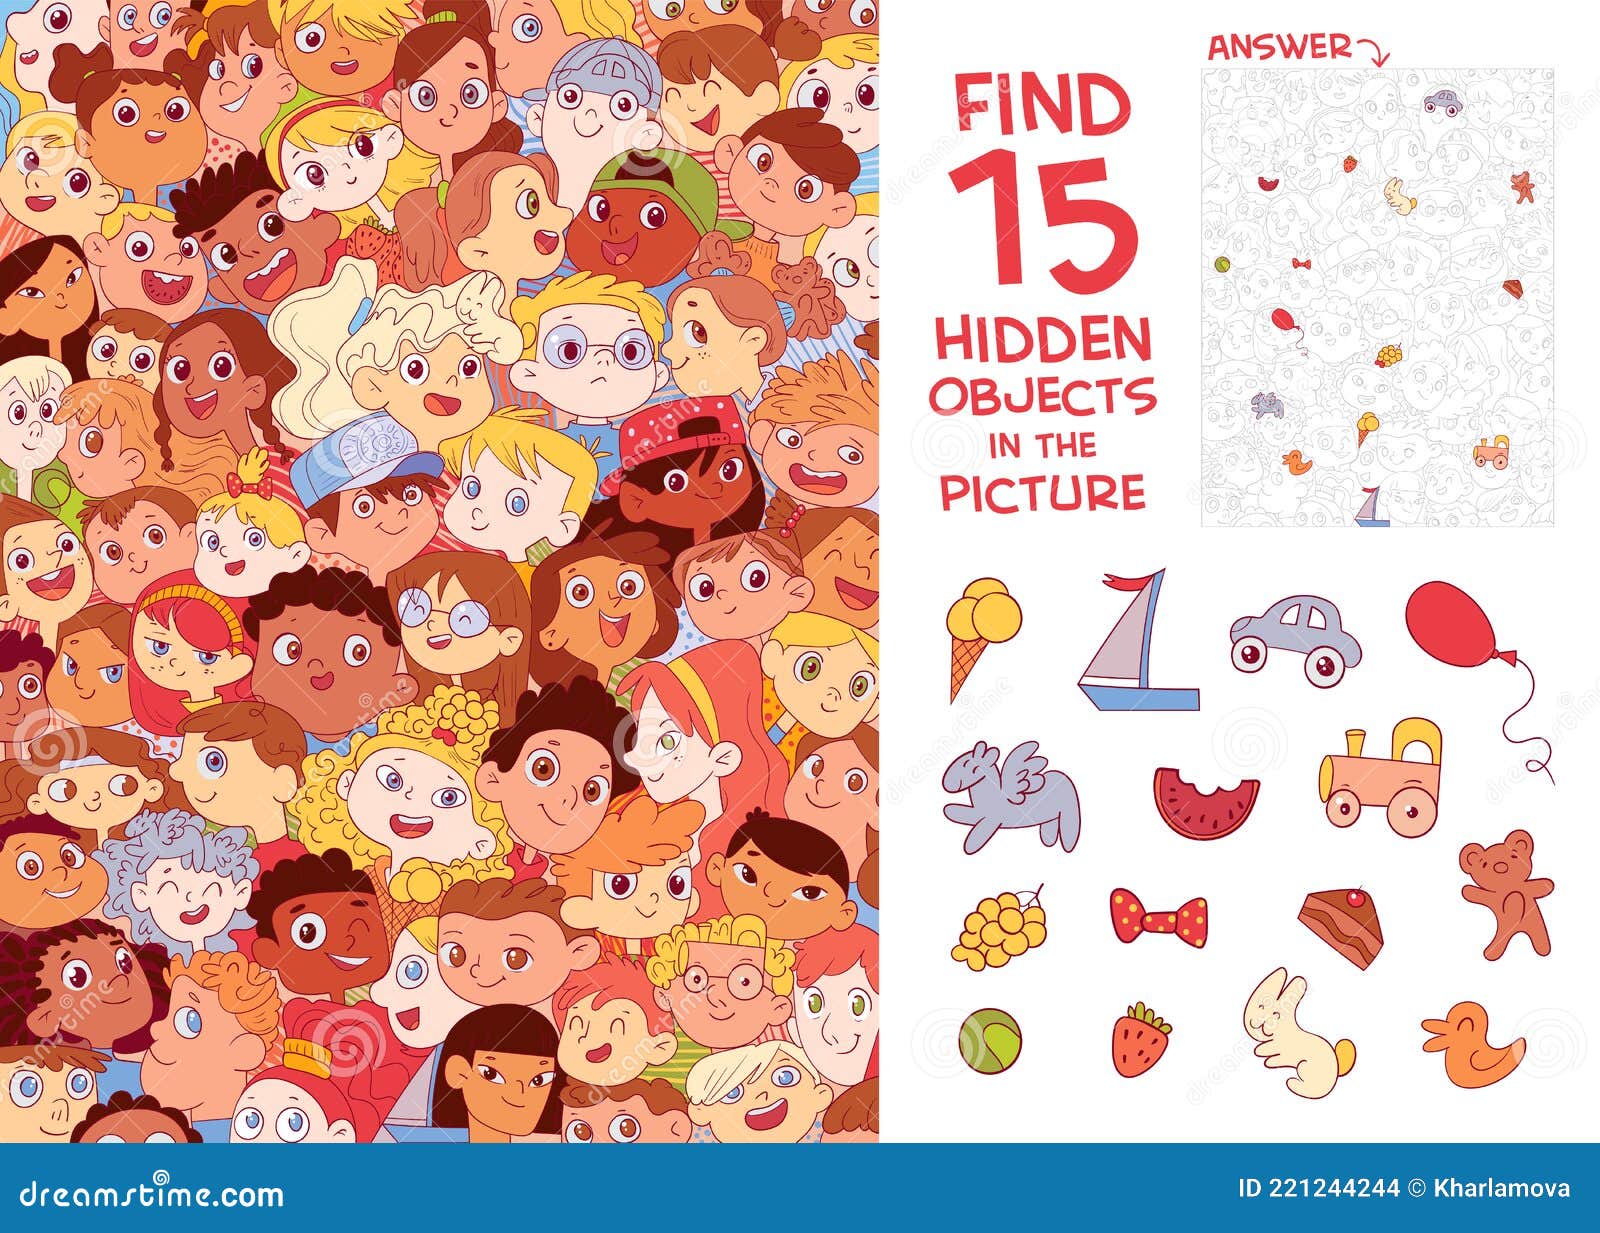 ethnic diversity of children`s faces. find 15 hidden objects